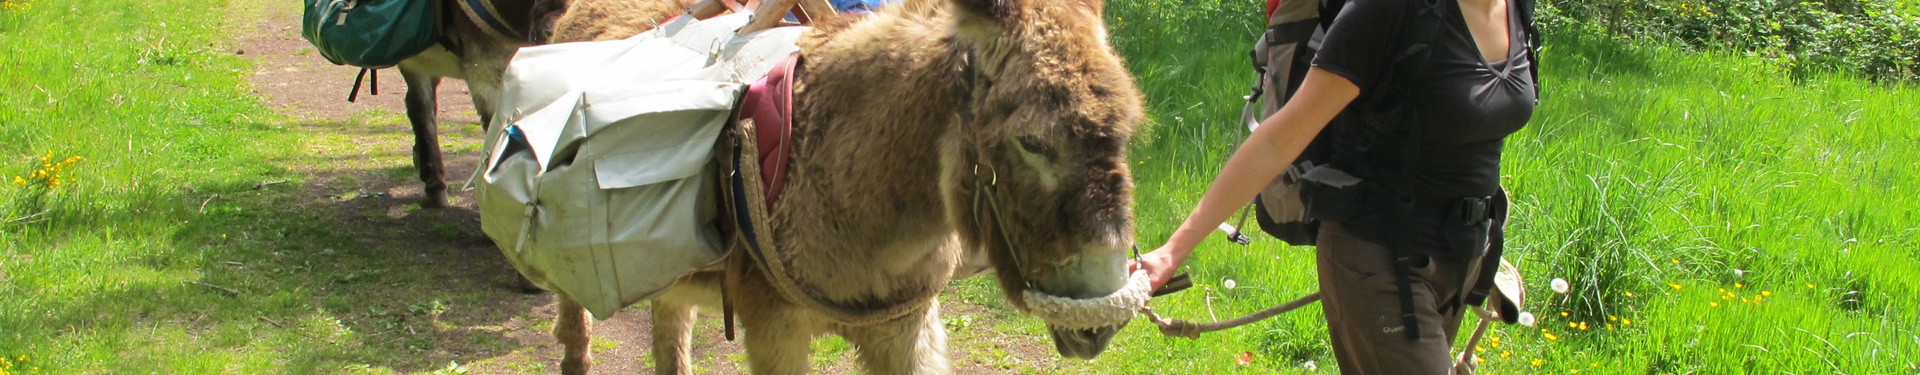 Quote request form - 5 days with a donkey in Auvergne | Aluna Voyages